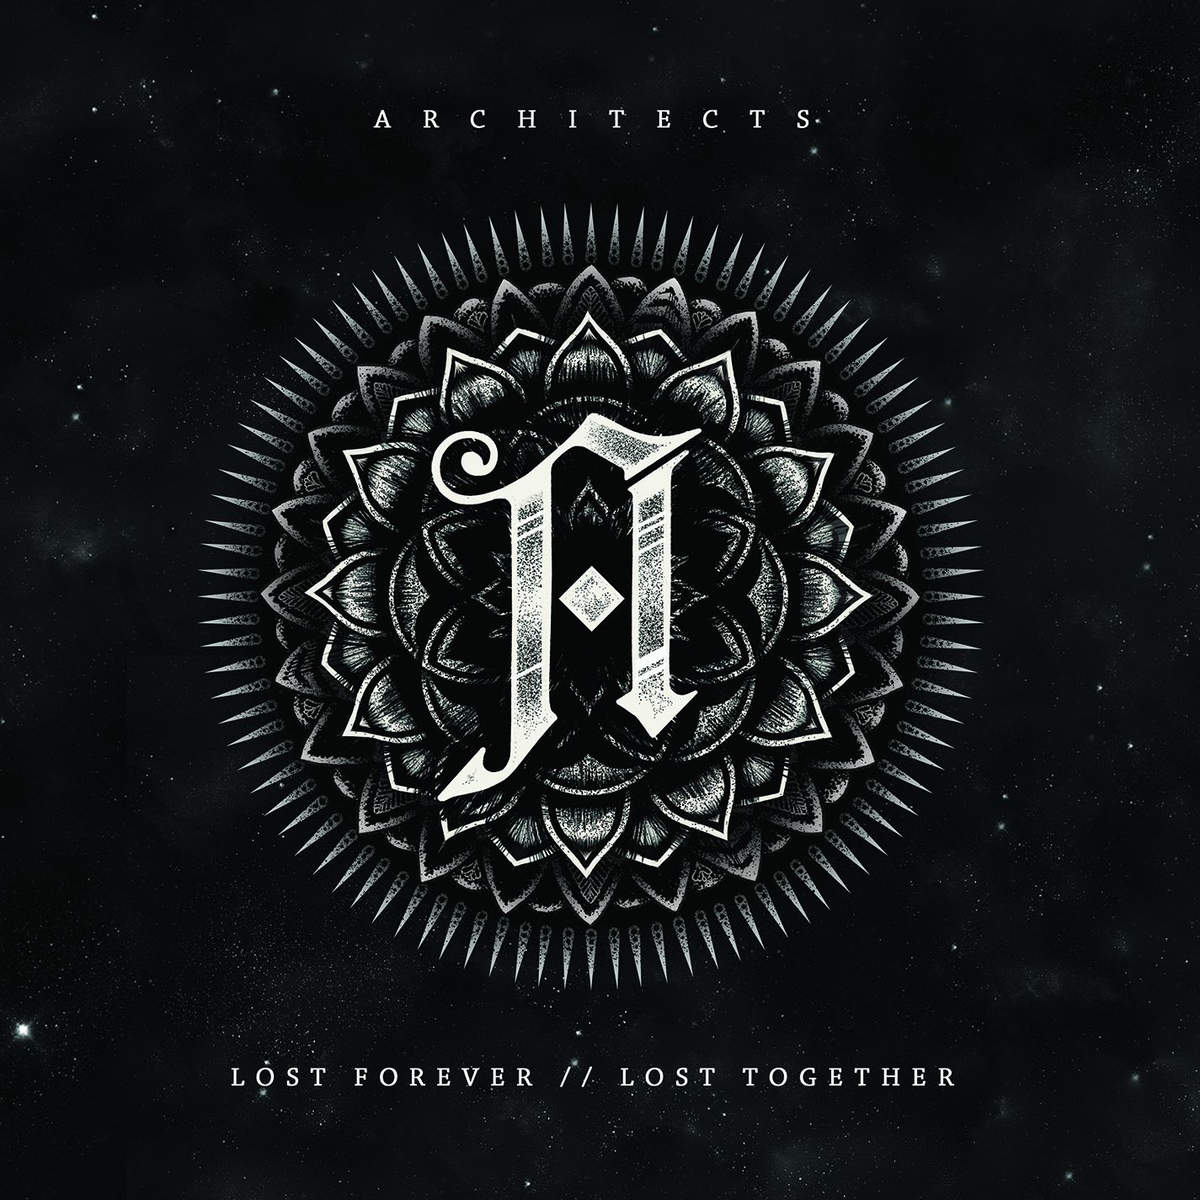 ARCHITECTS LYRICS - Lost Forever // Lost Together 2014